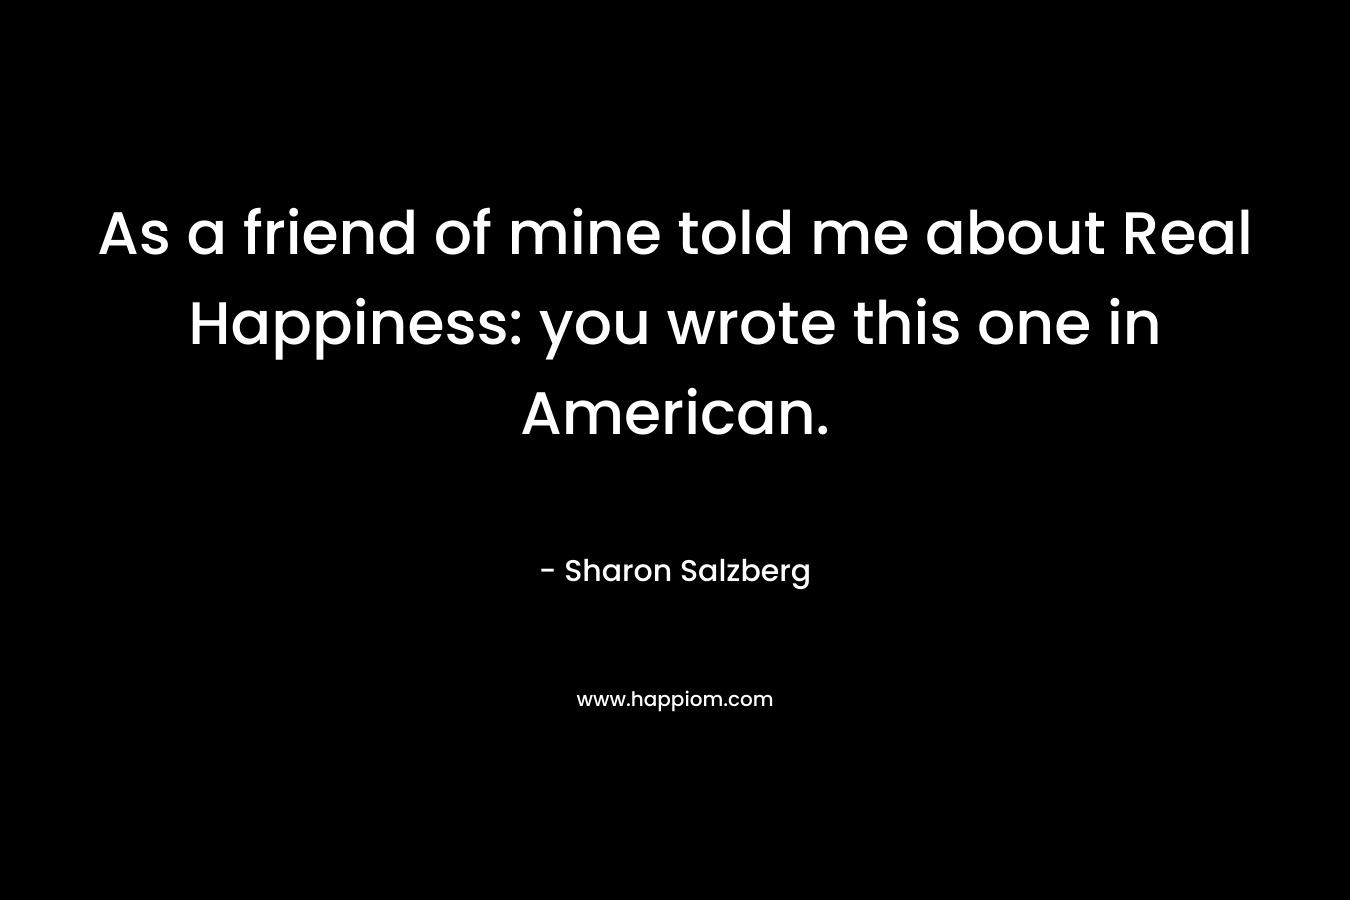 As a friend of mine told me about Real Happiness: you wrote this one in American. – Sharon Salzberg